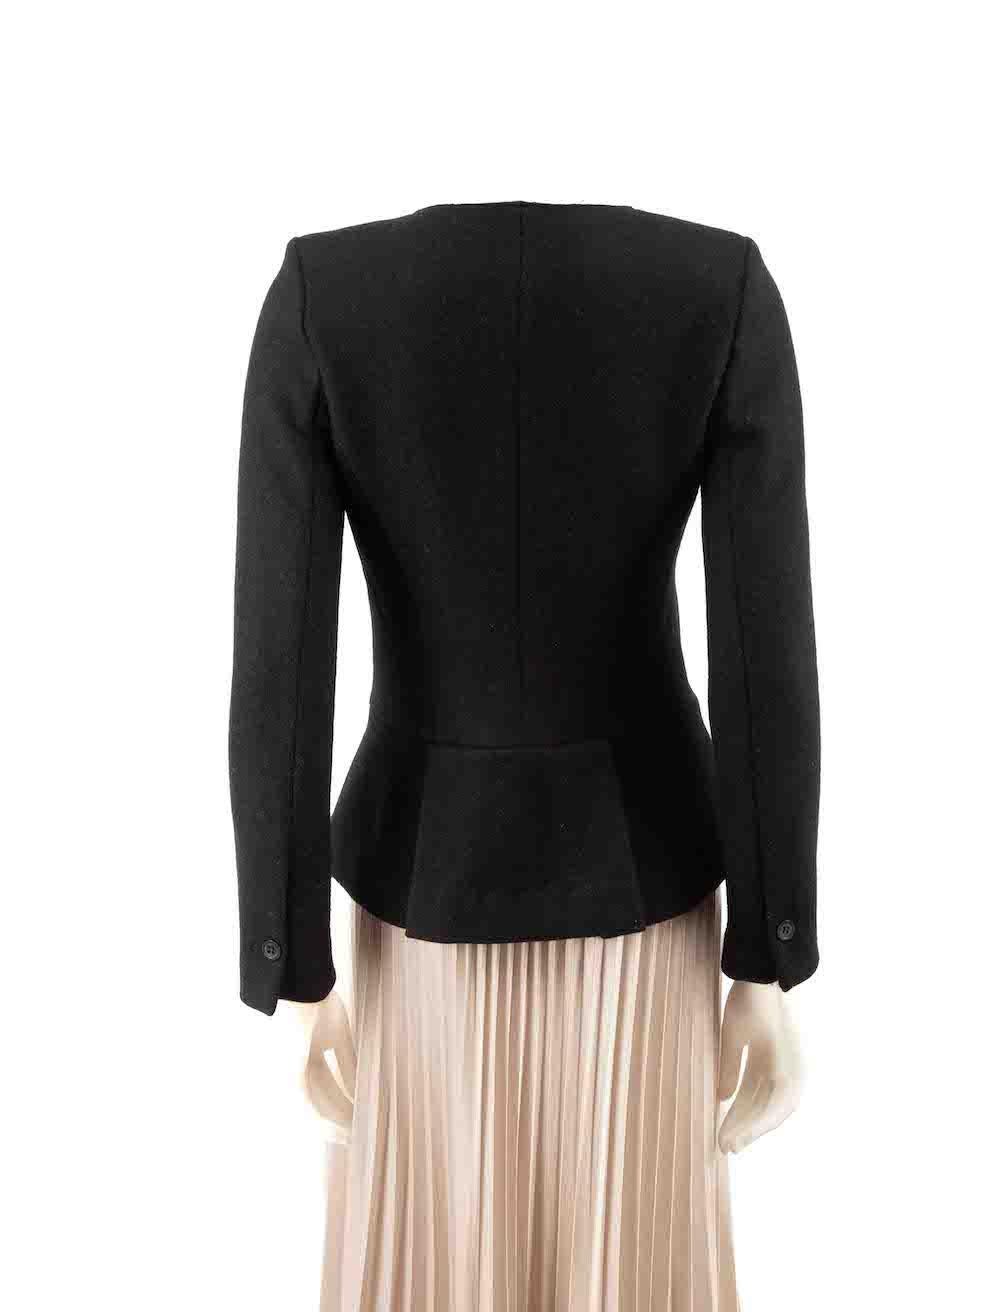 Isabel Marant Black Merino Wool Fitted Jacket Size S In Good Condition For Sale In London, GB